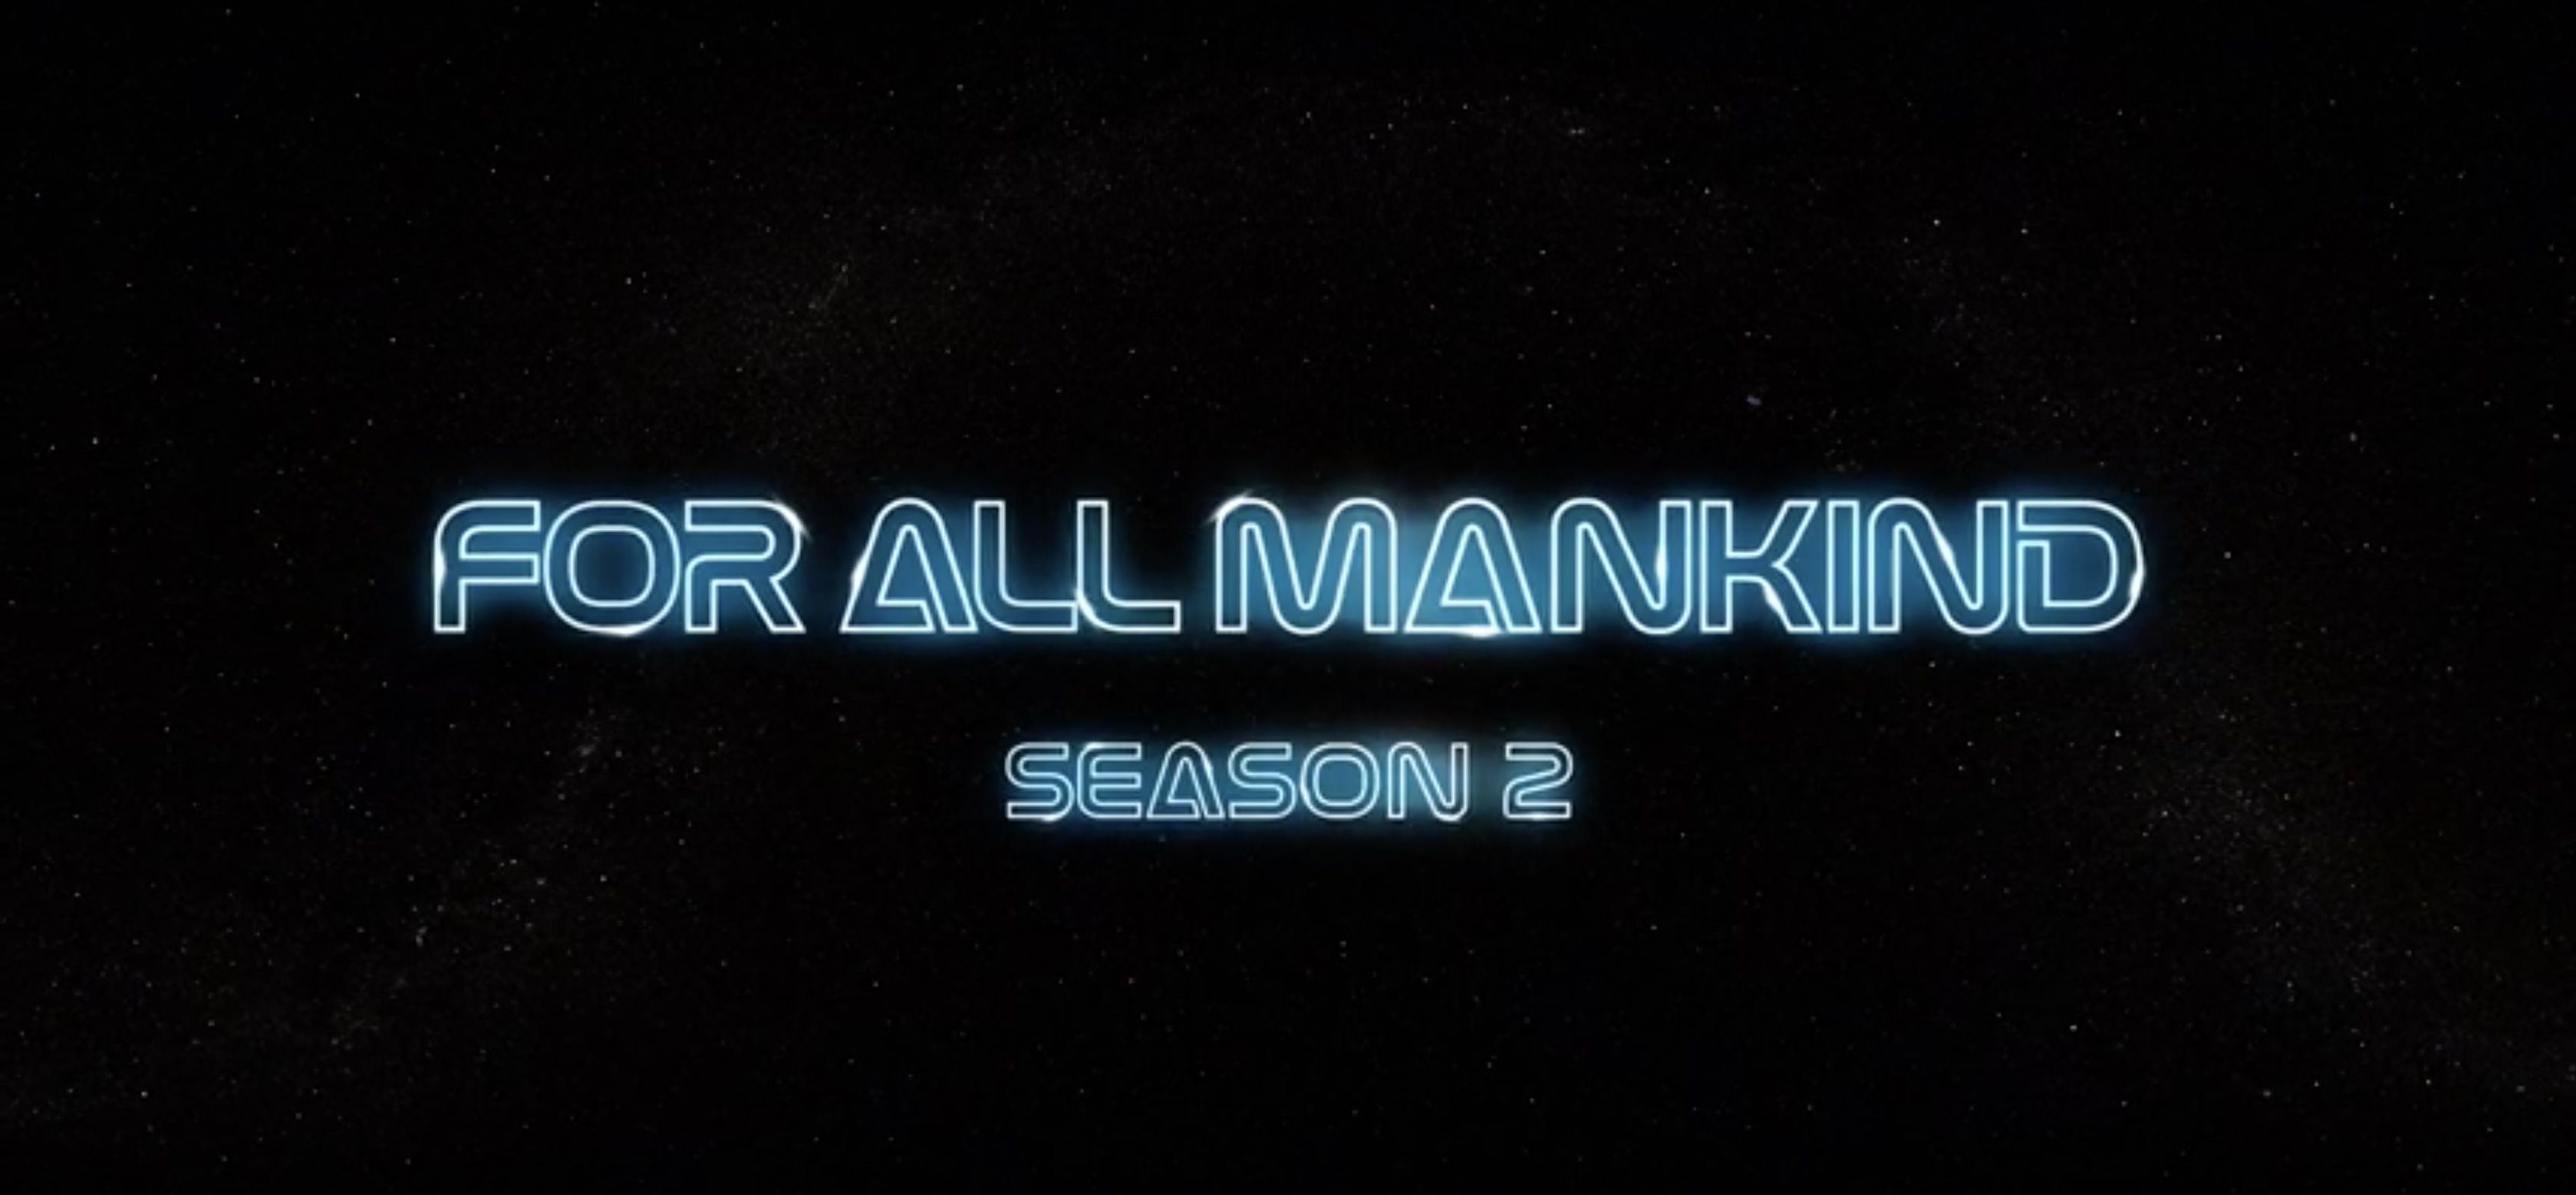 'For All Mankind' Season 2 Trailer Shared on IMDb, with No Official ...